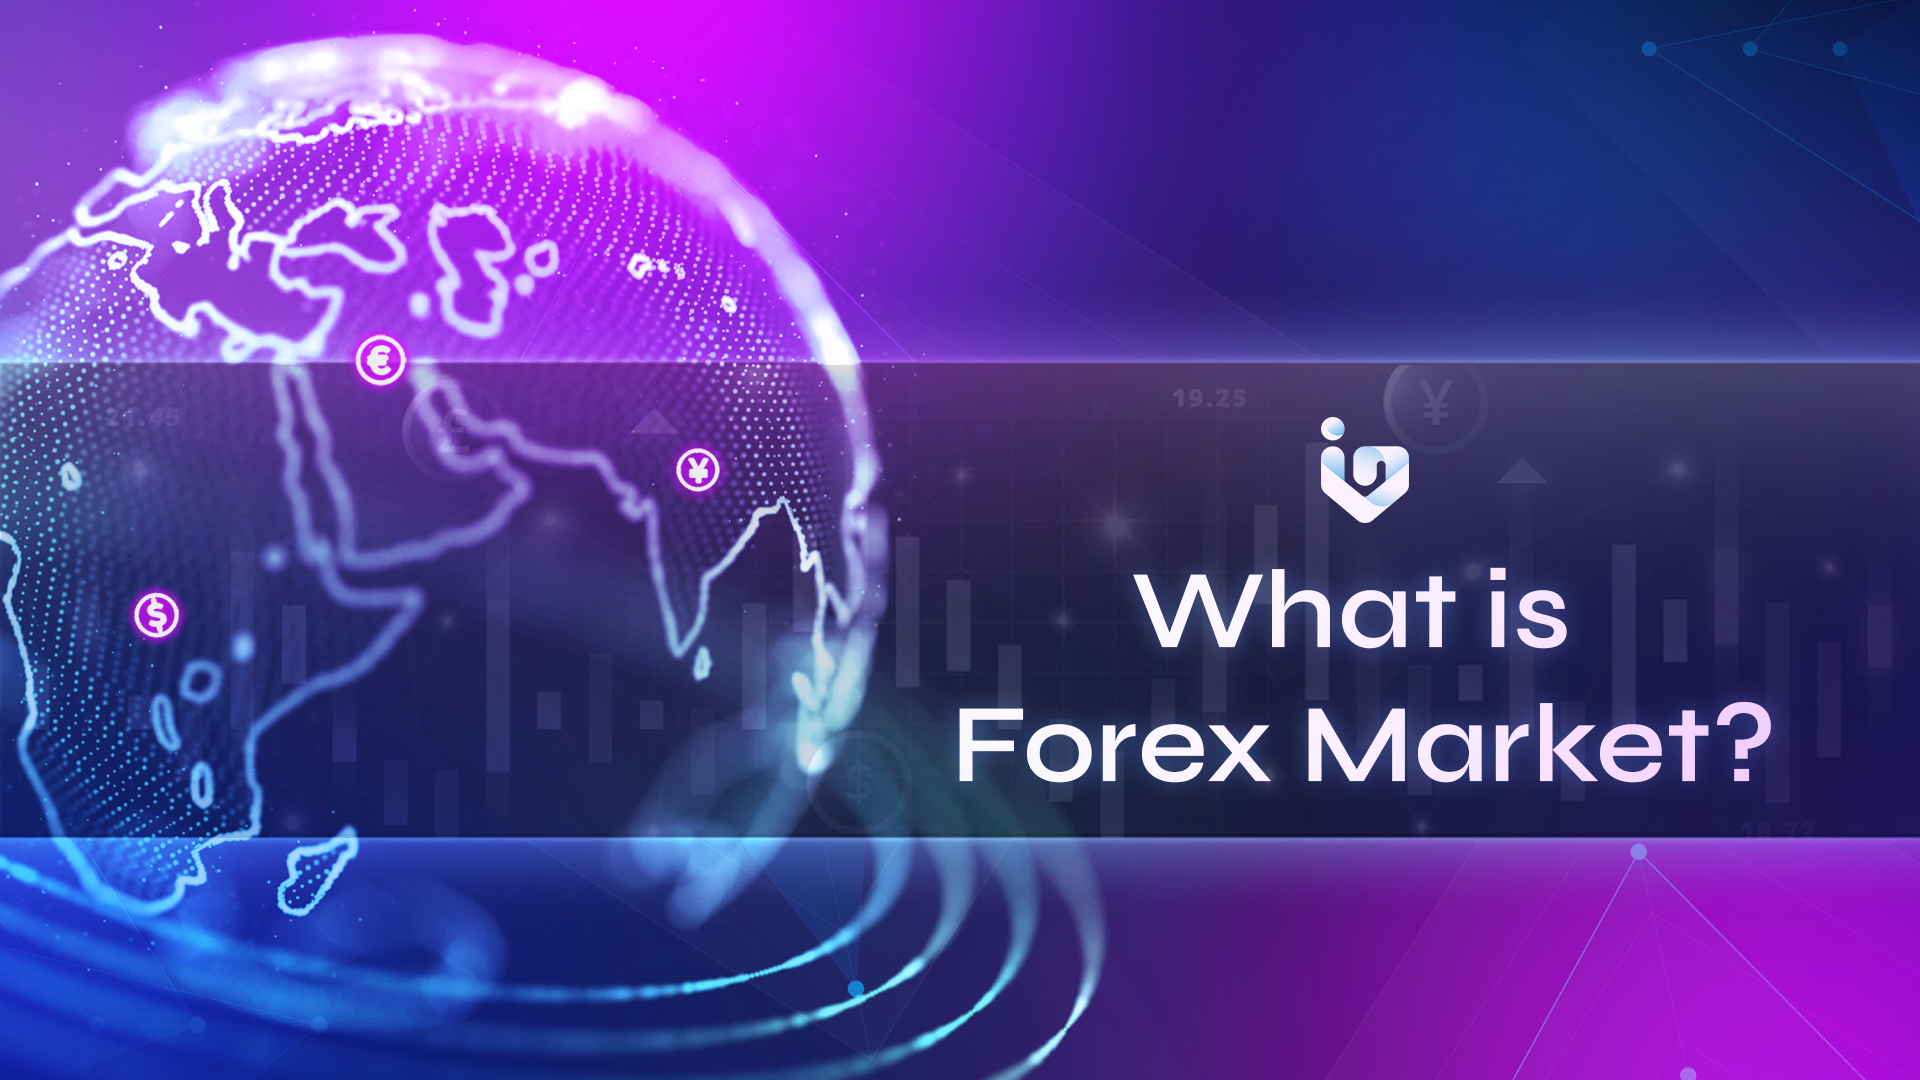 What is the forex market